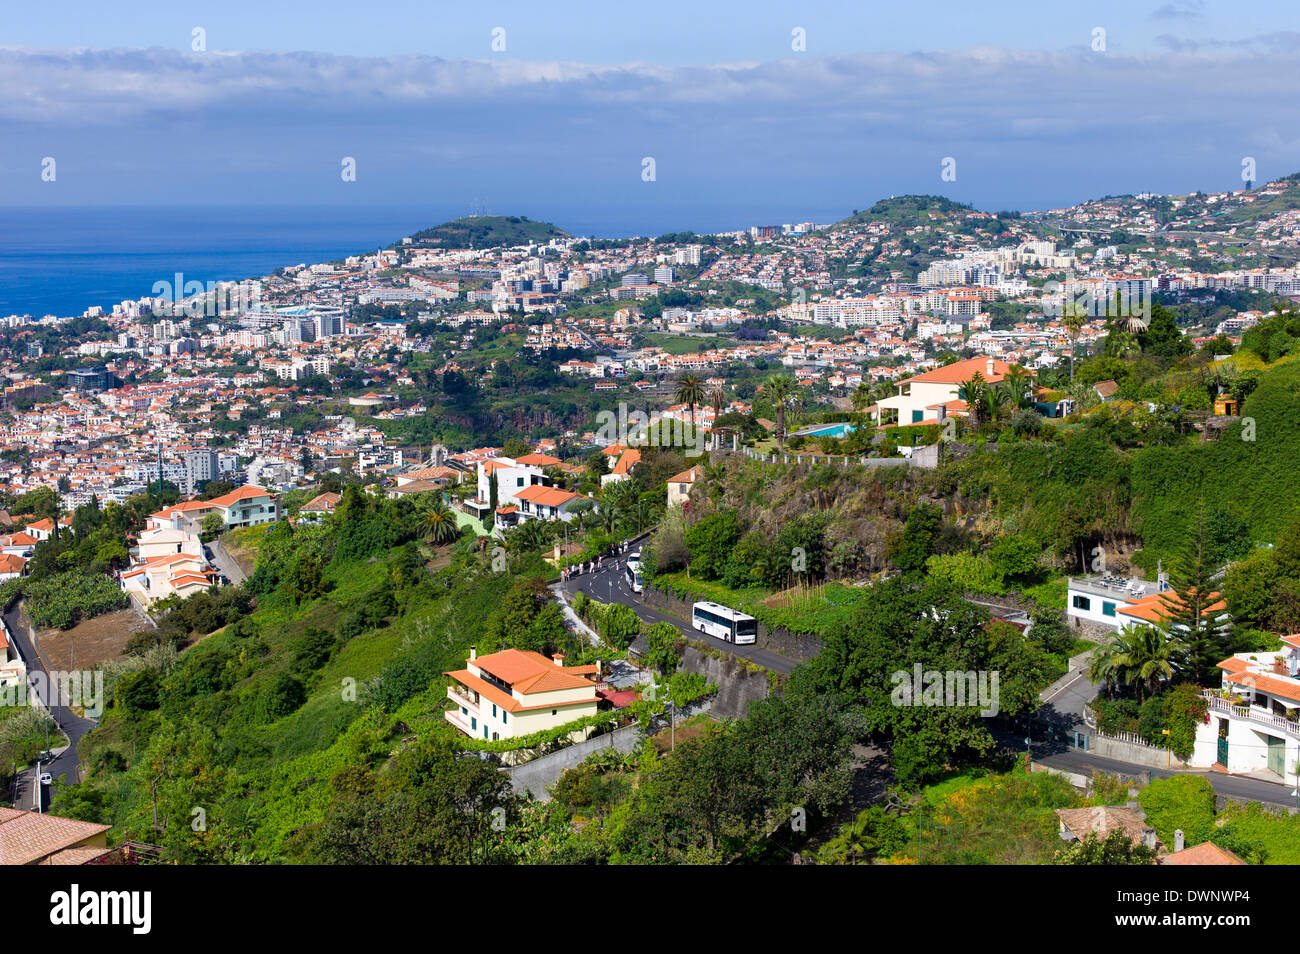 View of the town of Funchal, Madeira, Portugal Stock Photo